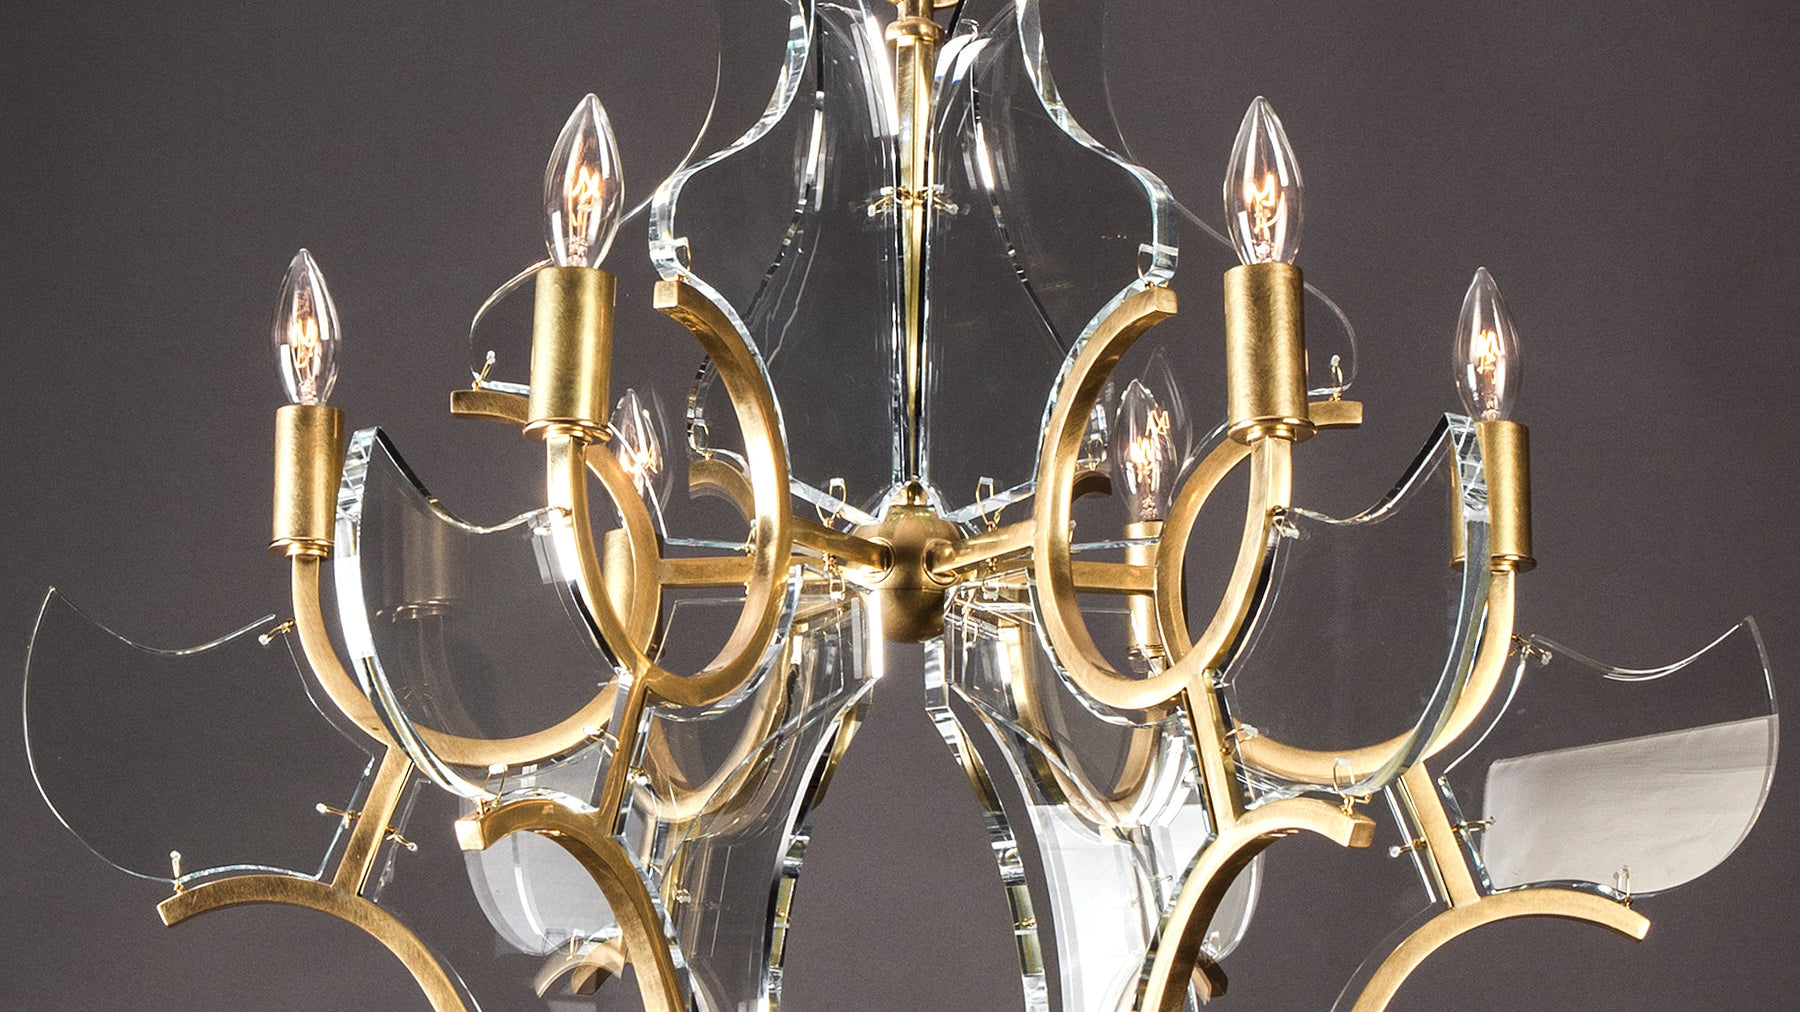 A detail shot of the Janus 12 Chandelier by Robert A.M. Stern, showing the the slightly beveled prisms of glass suspended by fine wire from square-section solid brass framing, and reflecting the light.